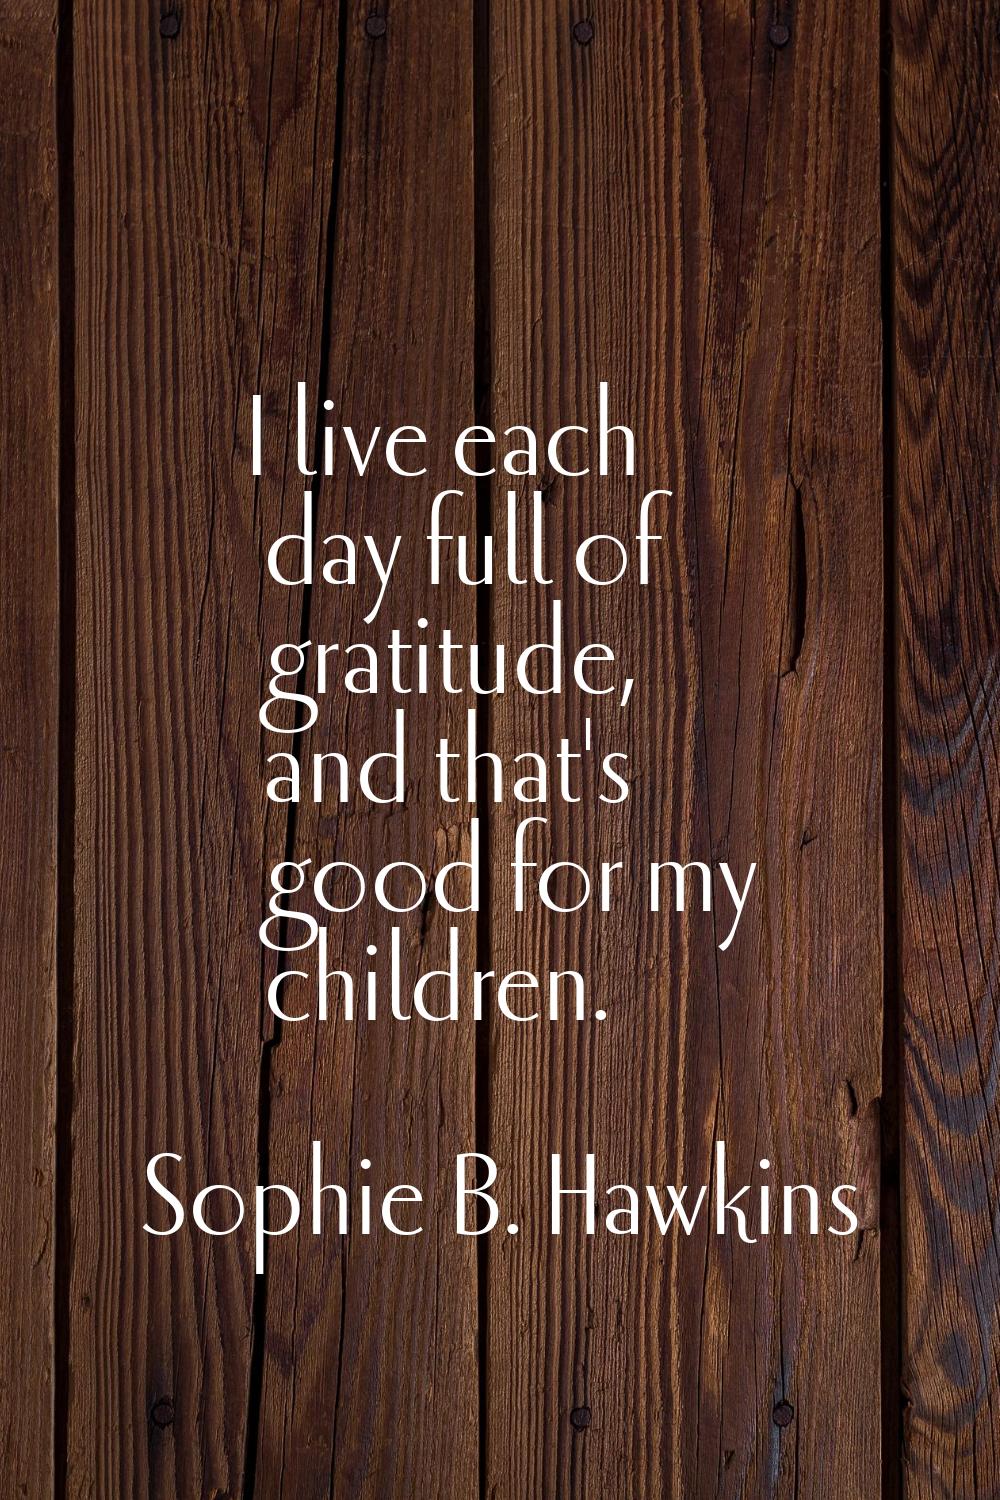 I live each day full of gratitude, and that's good for my children.